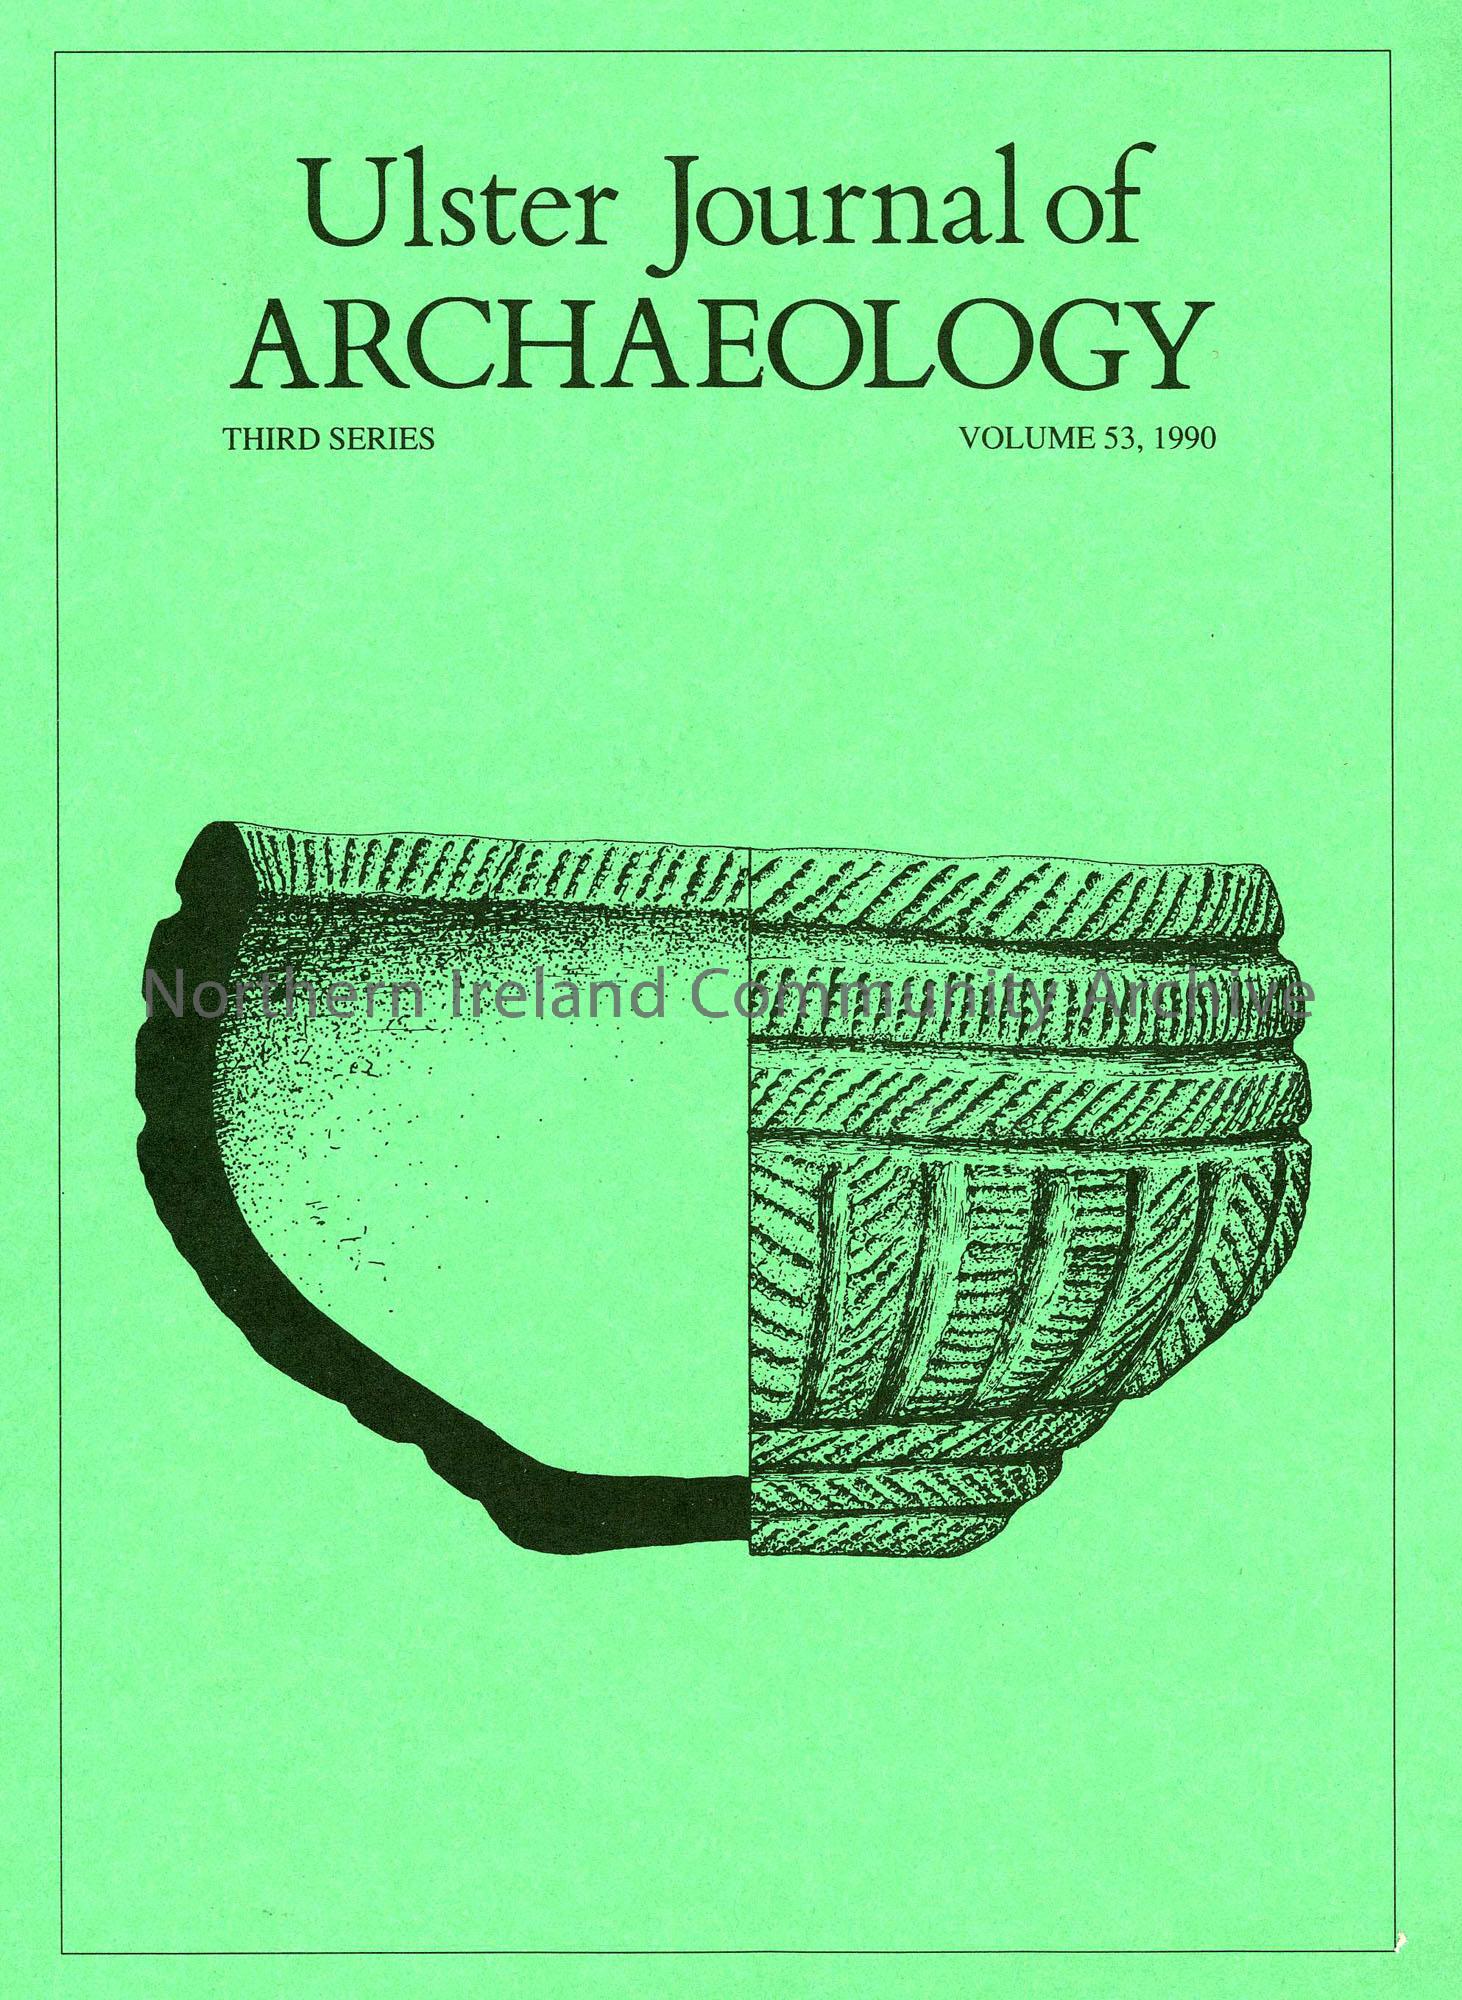 book titled, Ulster Journal of Archaeology. Third Series Volume 53, 1990 (1650)